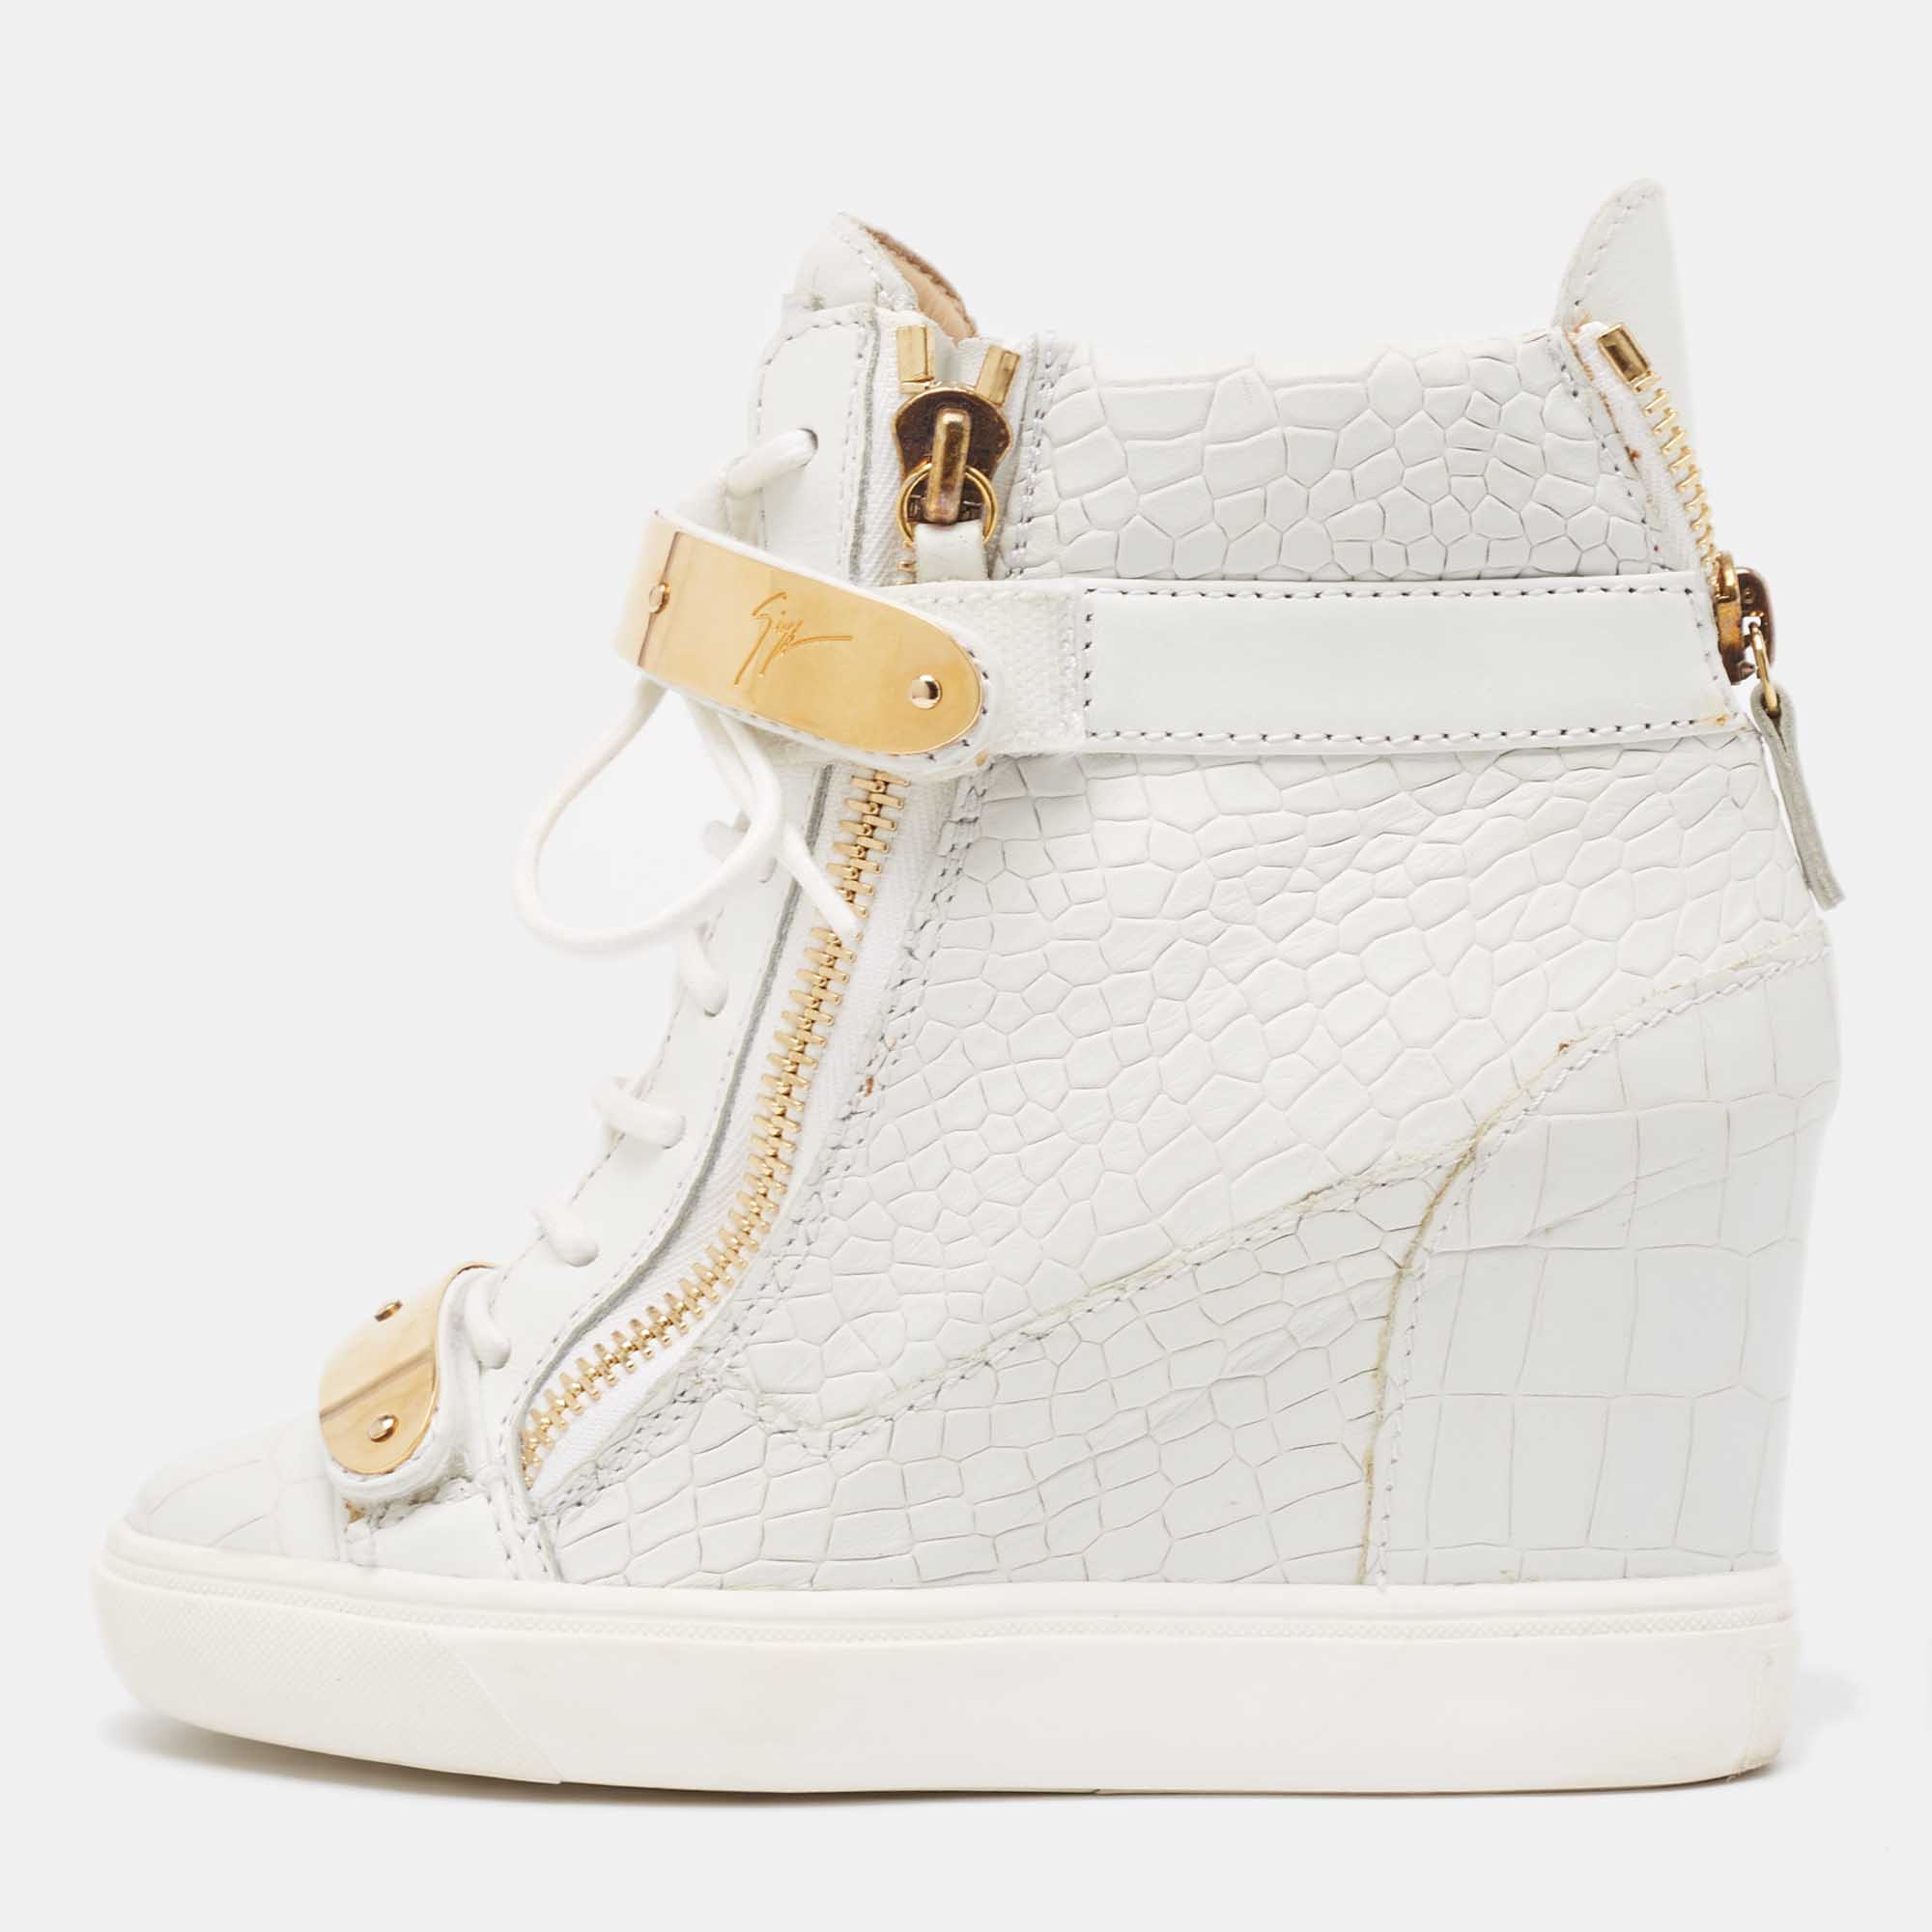 Giuseppe zanotti white croc embossed leather wedge high top sneakers size 36